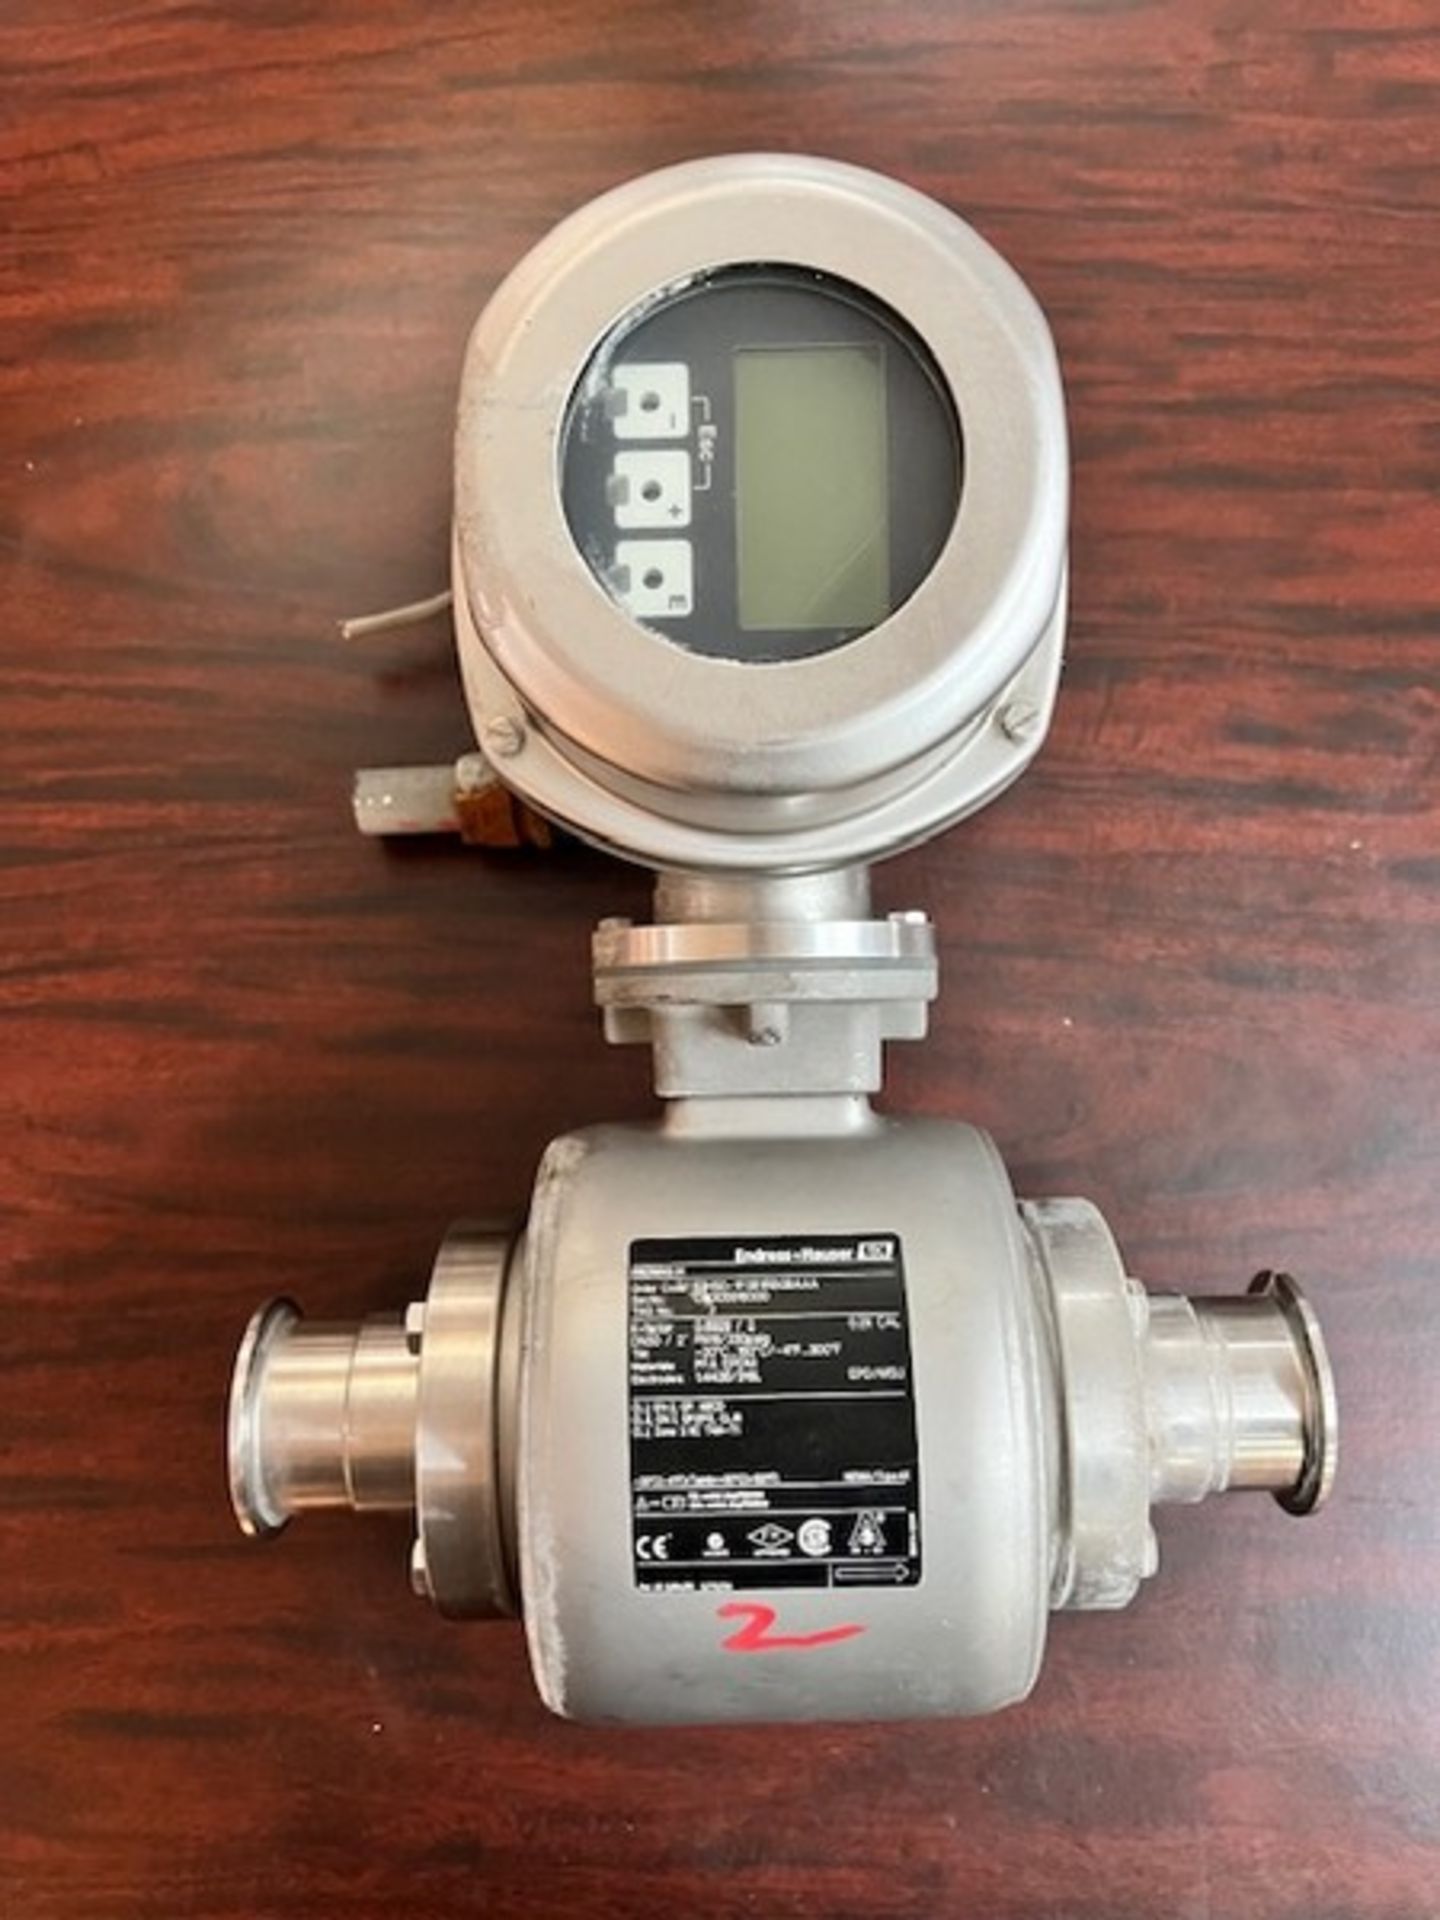 Endress+Hauser Pro Mag H Flow Tube with Endress+Hauser Pro Mag 53 Transmitter, S/N C4005916000 (Load